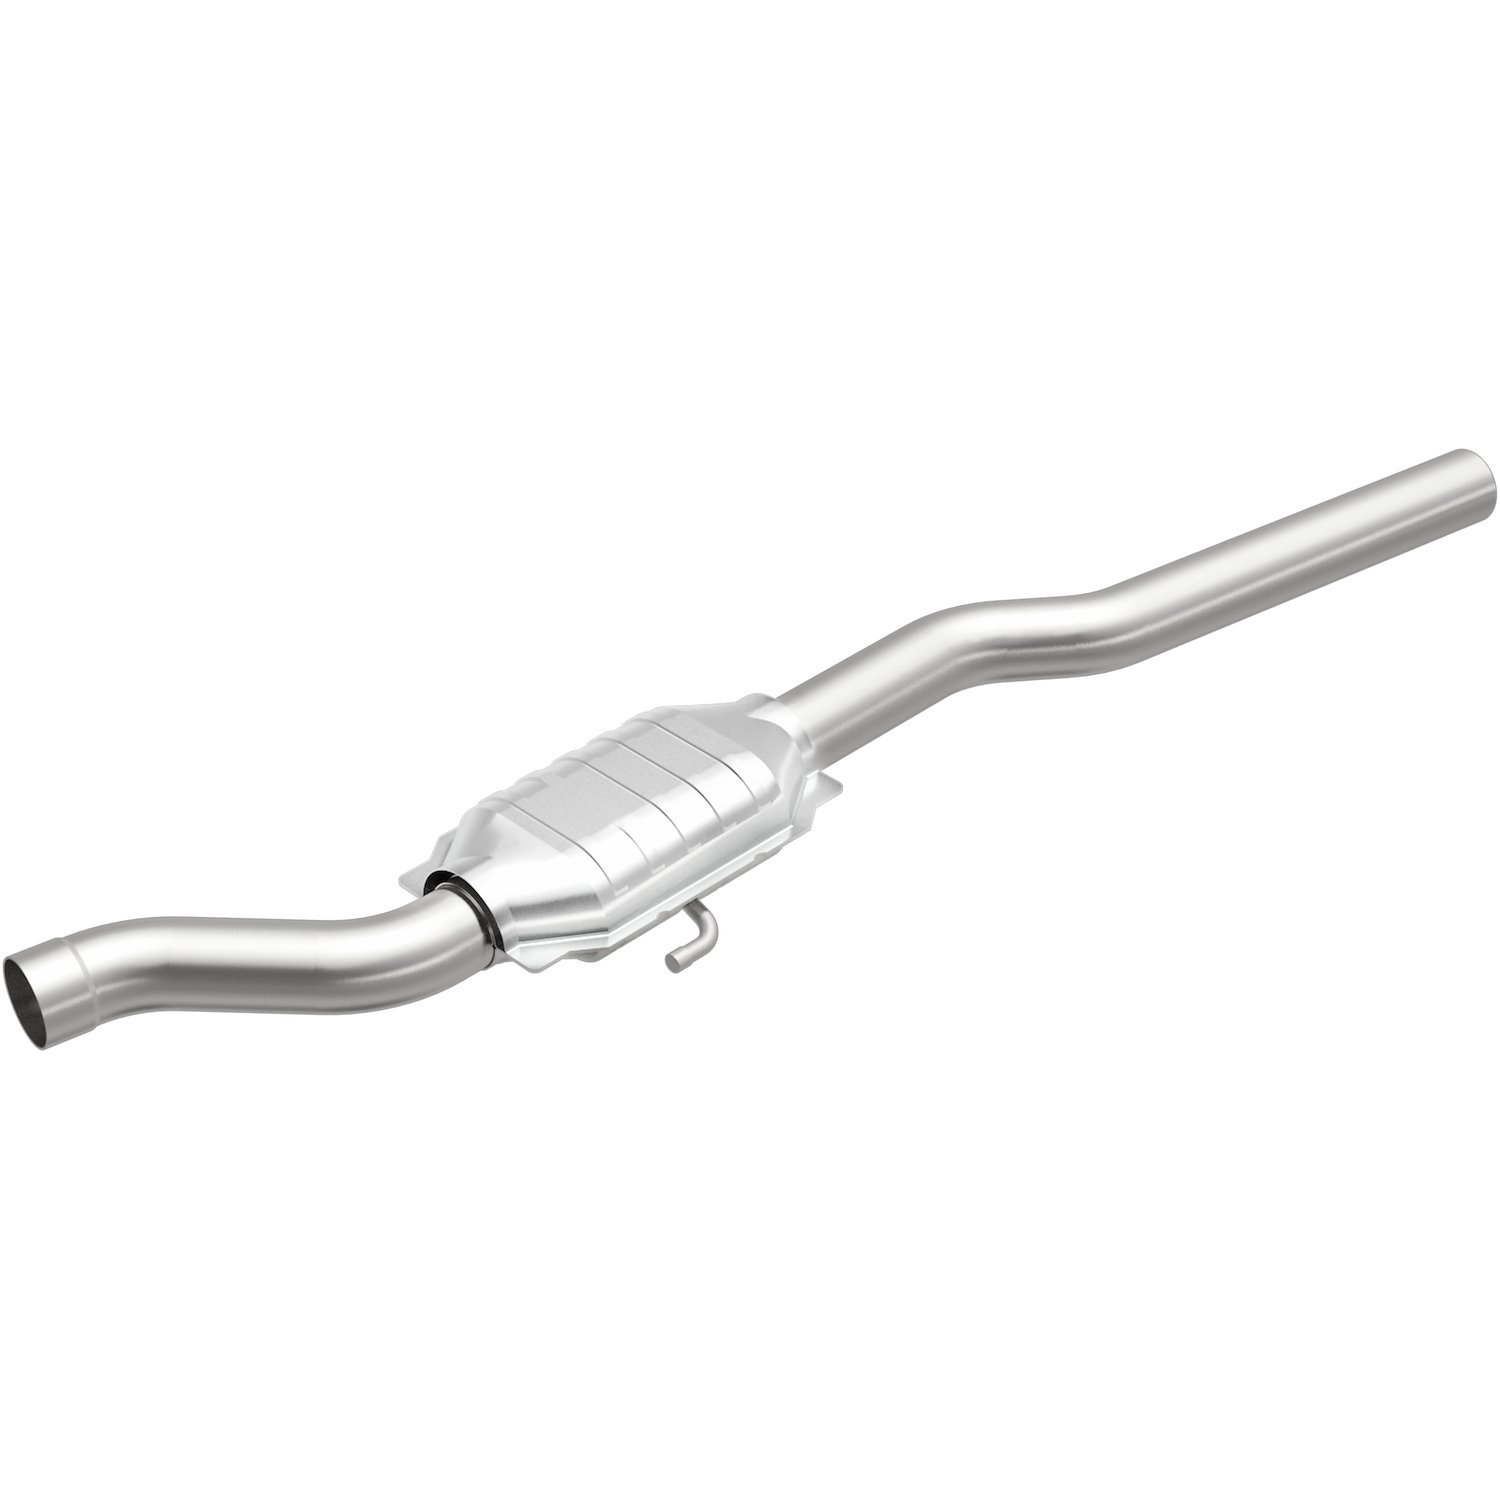 California Grade CARB Compliant Direct-Fit Catalytic Converter